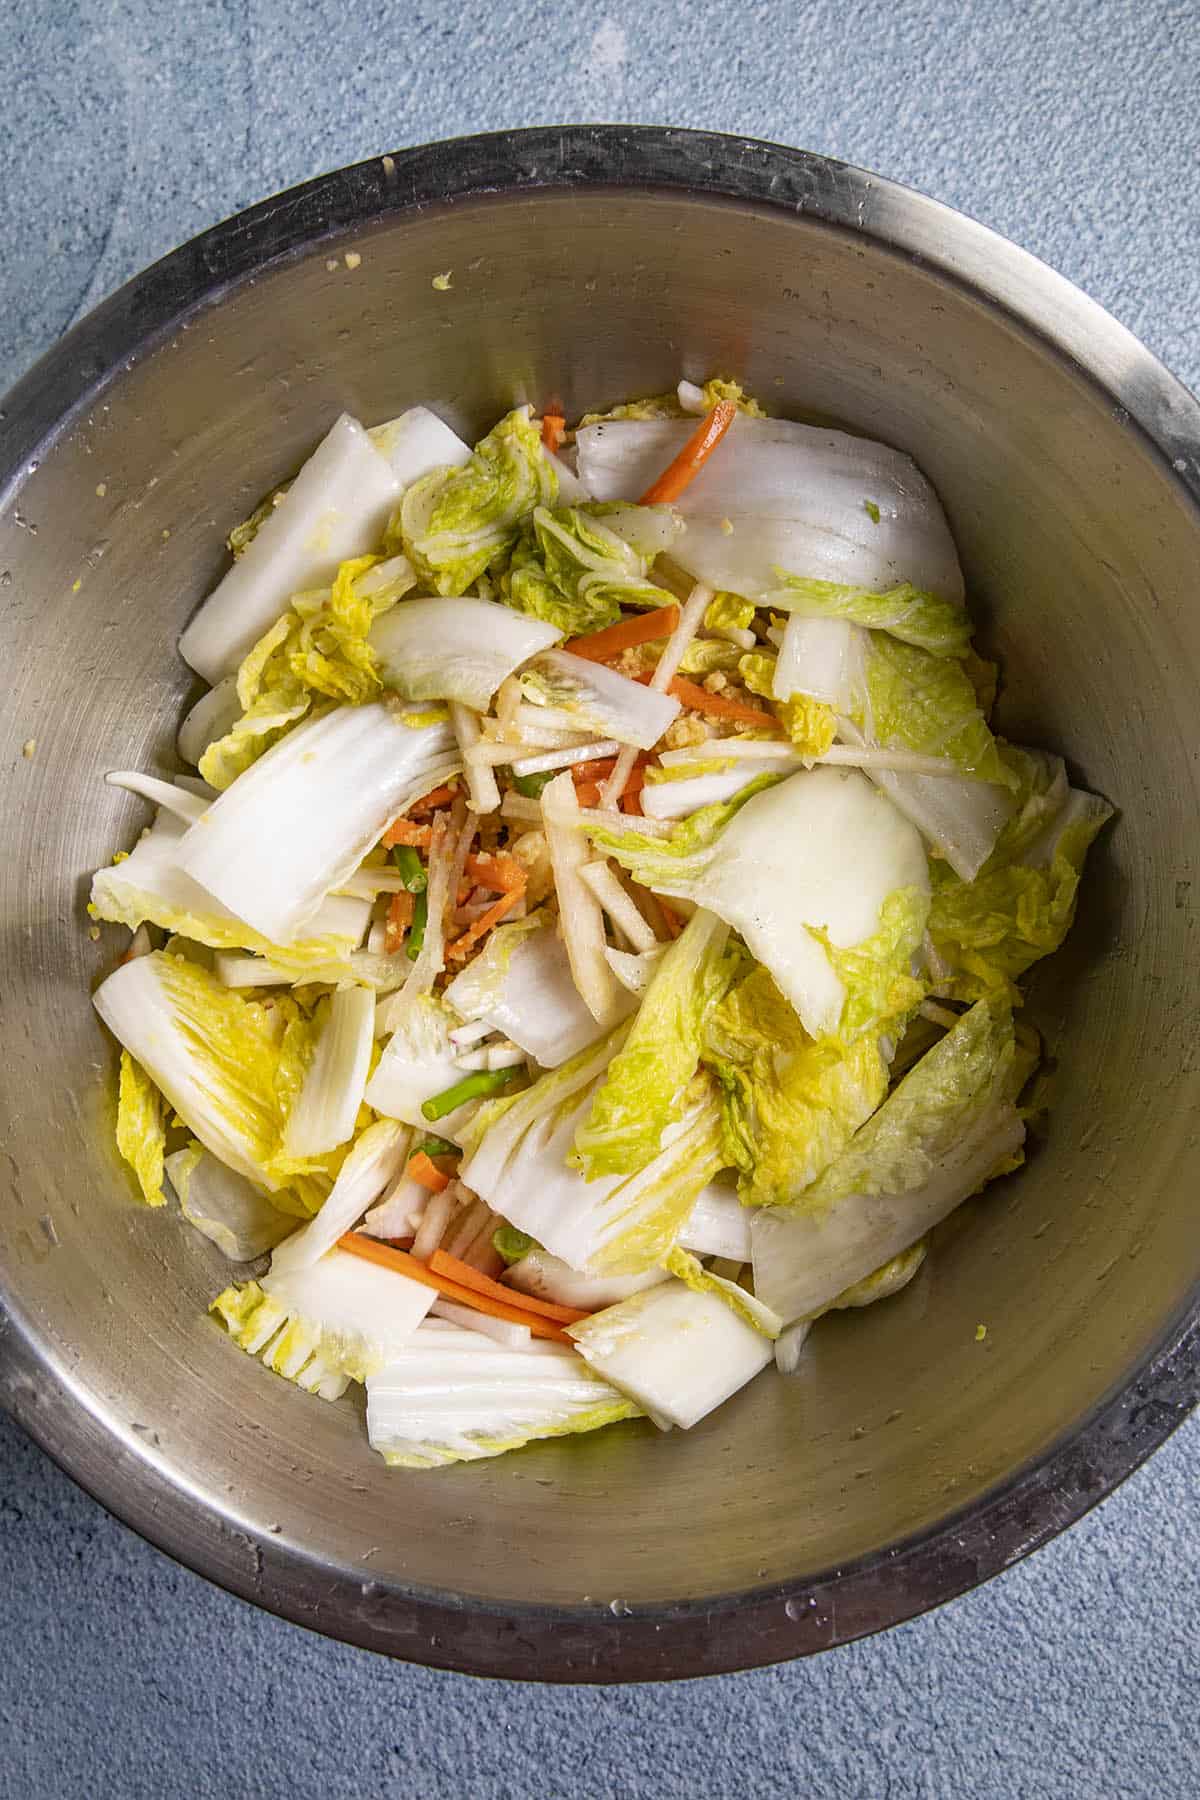 Chopped cabbage and vegetables in a large bowl for making kimchi